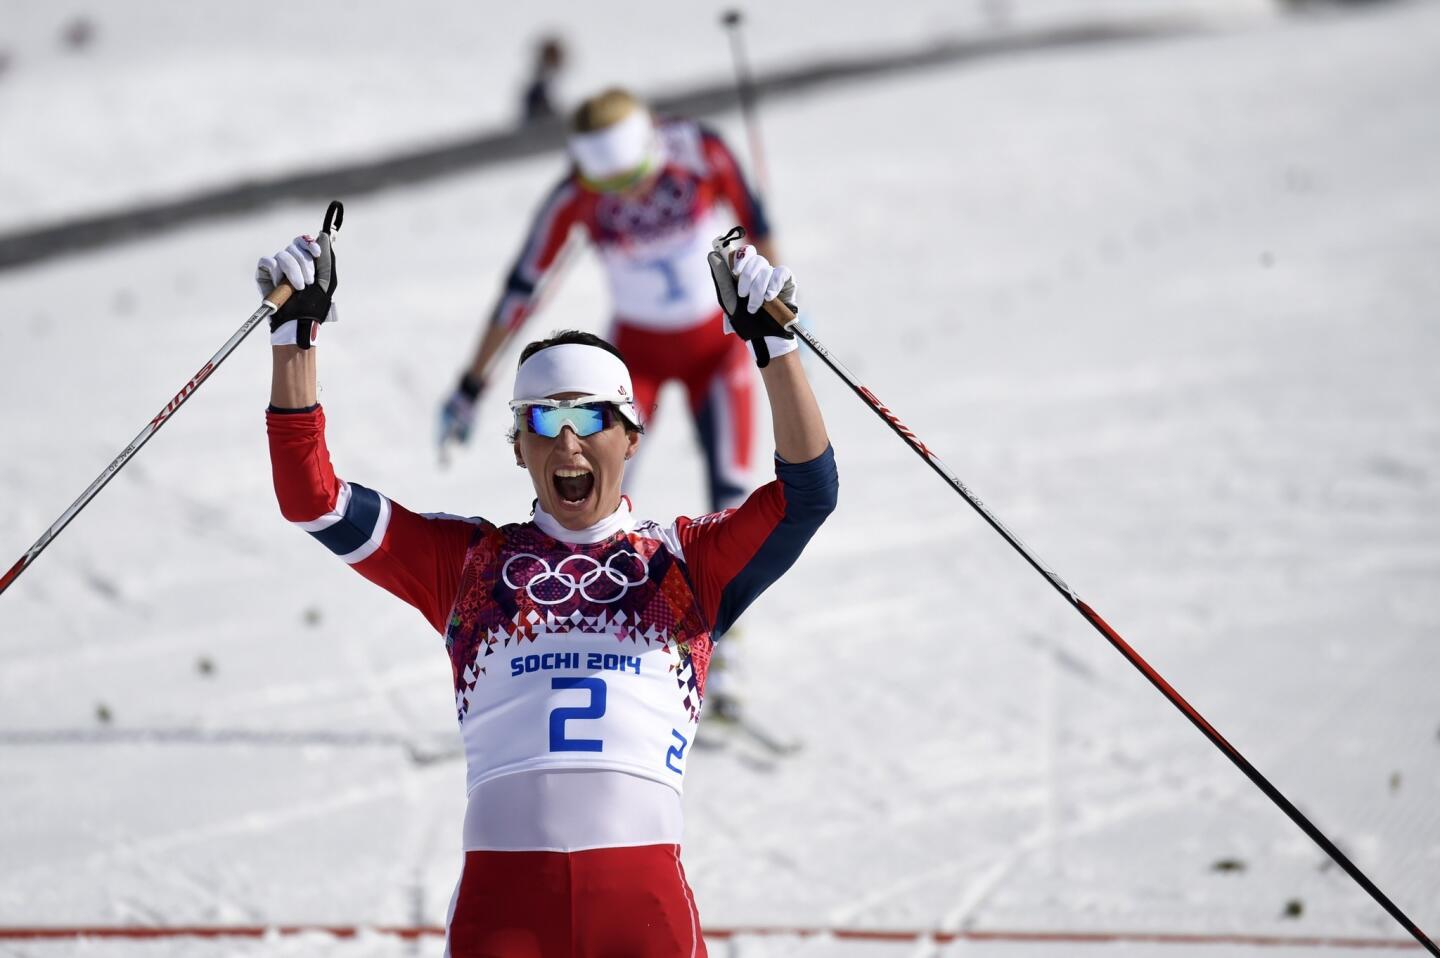 Norway's Marit Bjoergen wins gold as she crosses the finish line in the women's cross-country skiing 30km mass start free.